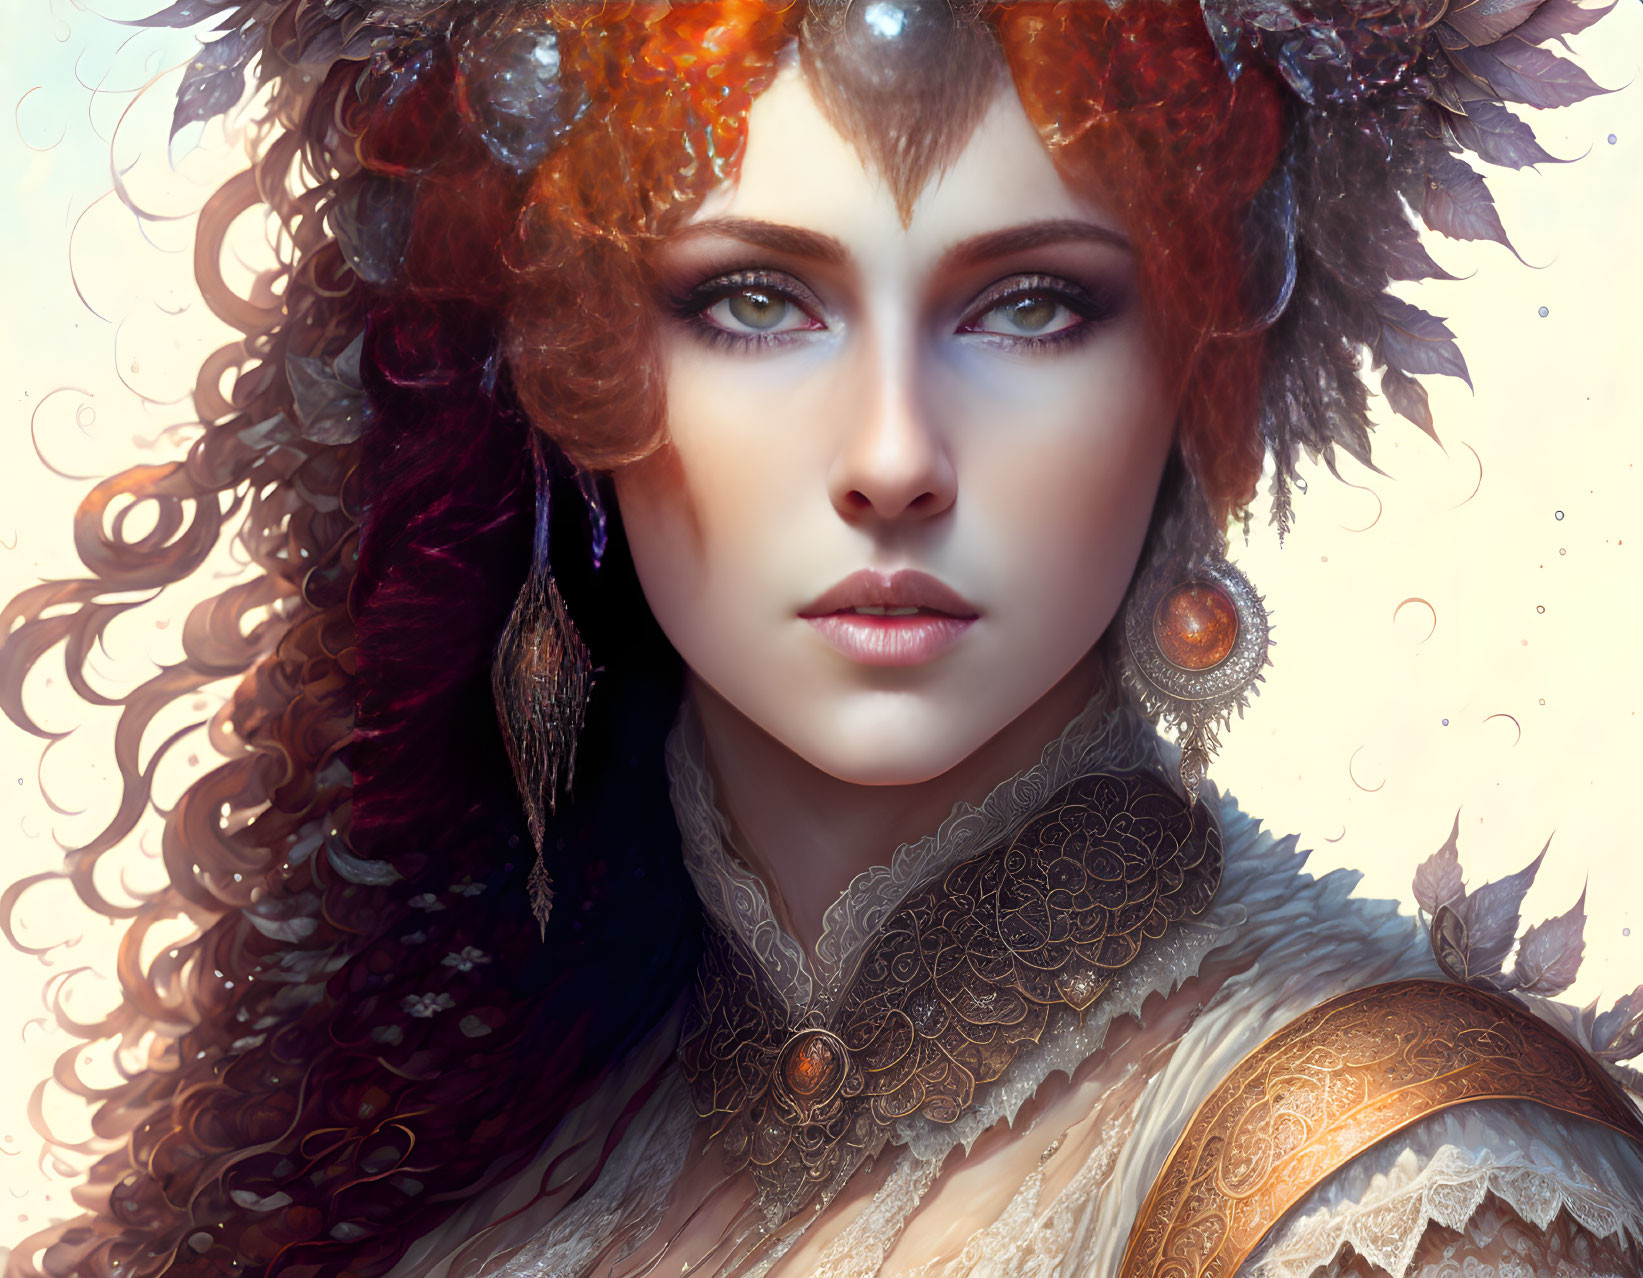 Detailed autumn-themed woman illustration with ornate headwear and jewelry in warm colors